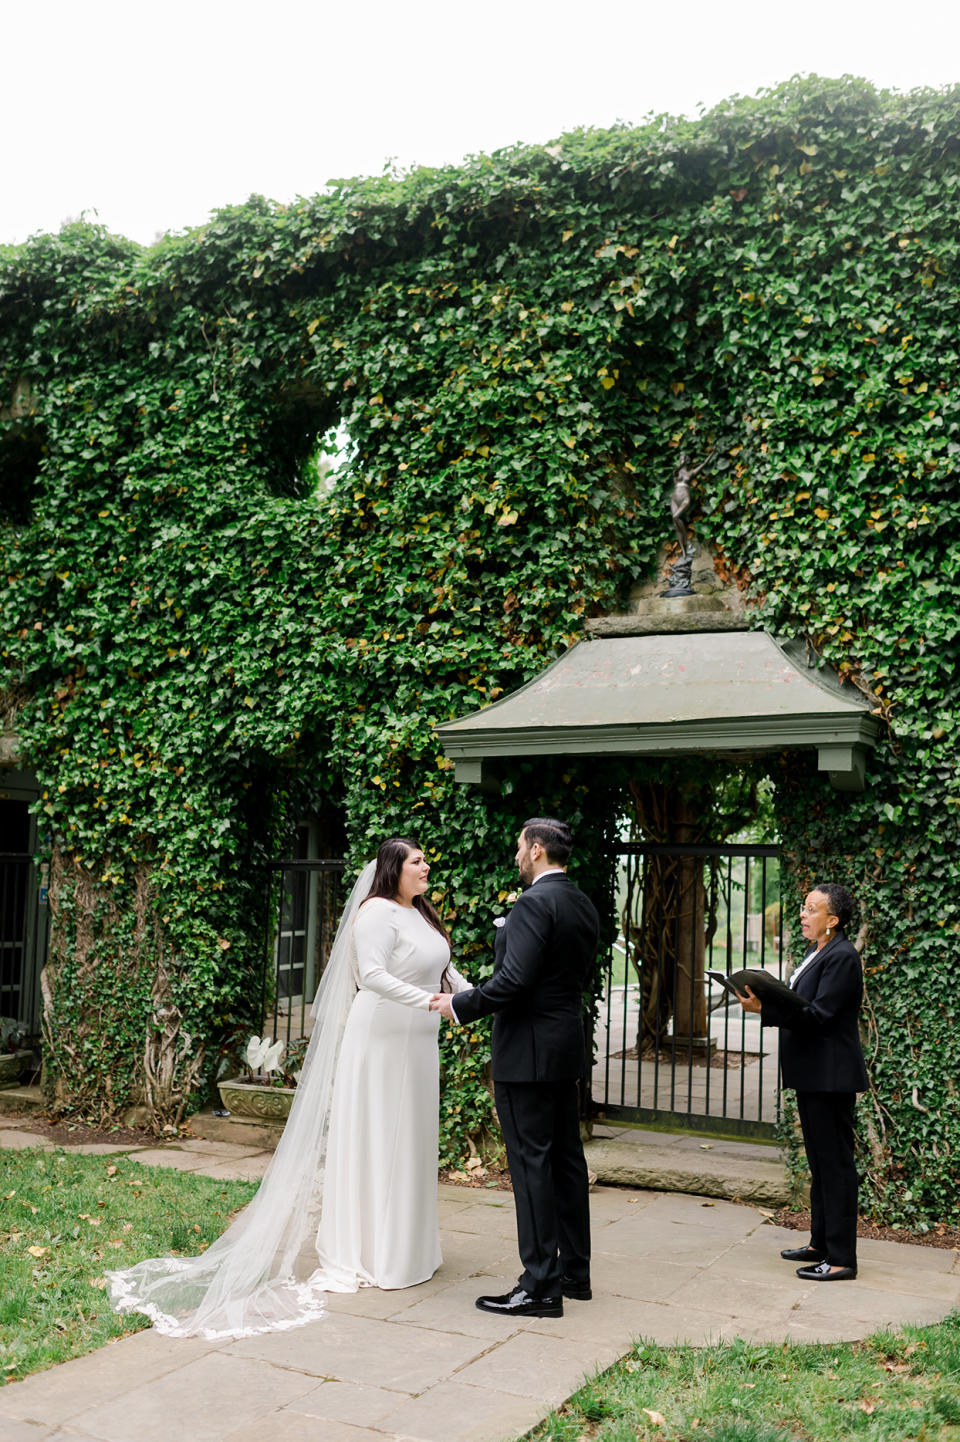 An Intimate Ceremony